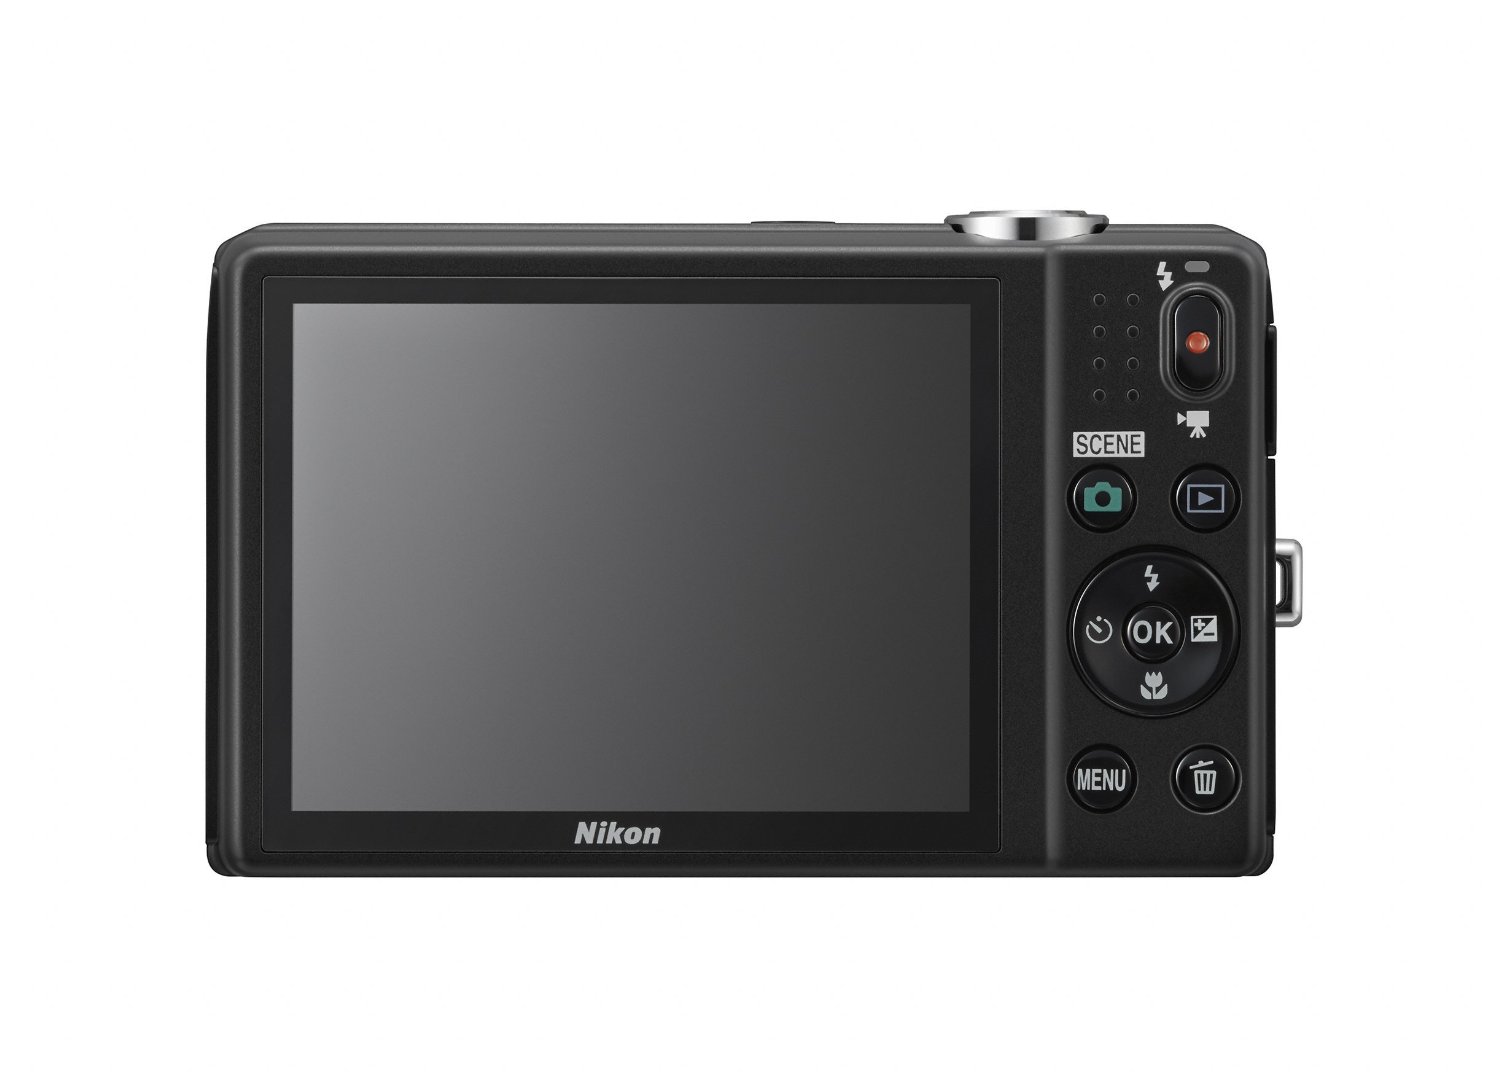 timmerman draad Spreek uit Nikon COOLPIX P900 and S6700 Cameras Benefit from New Firmware